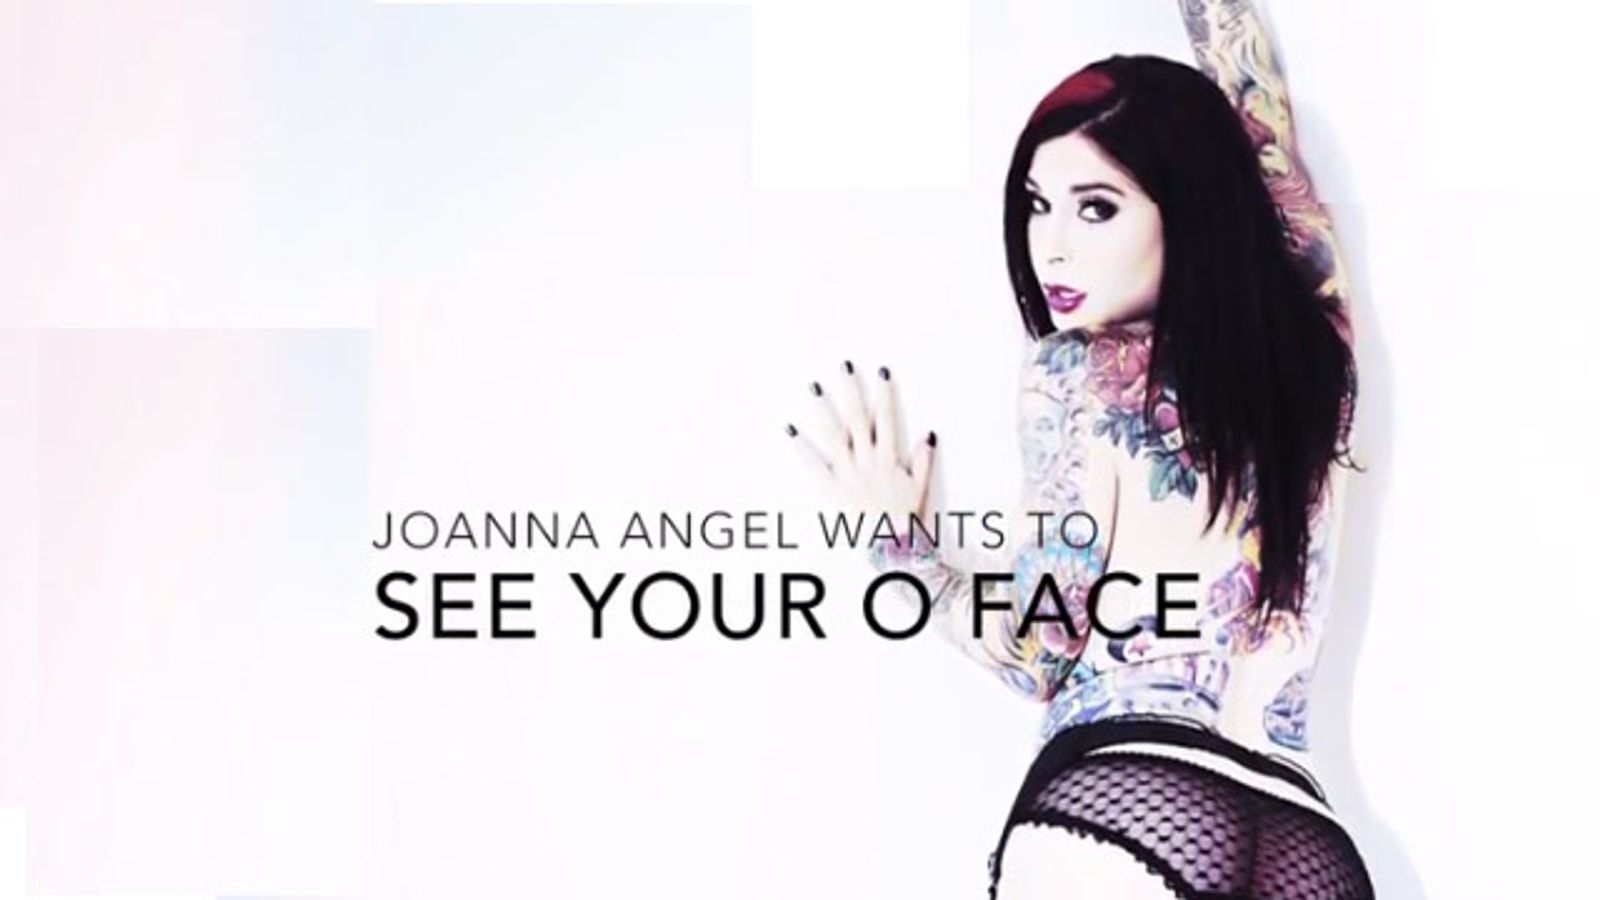 Joanna Angel Looking for Best ‘O’ Faces For New Music Video